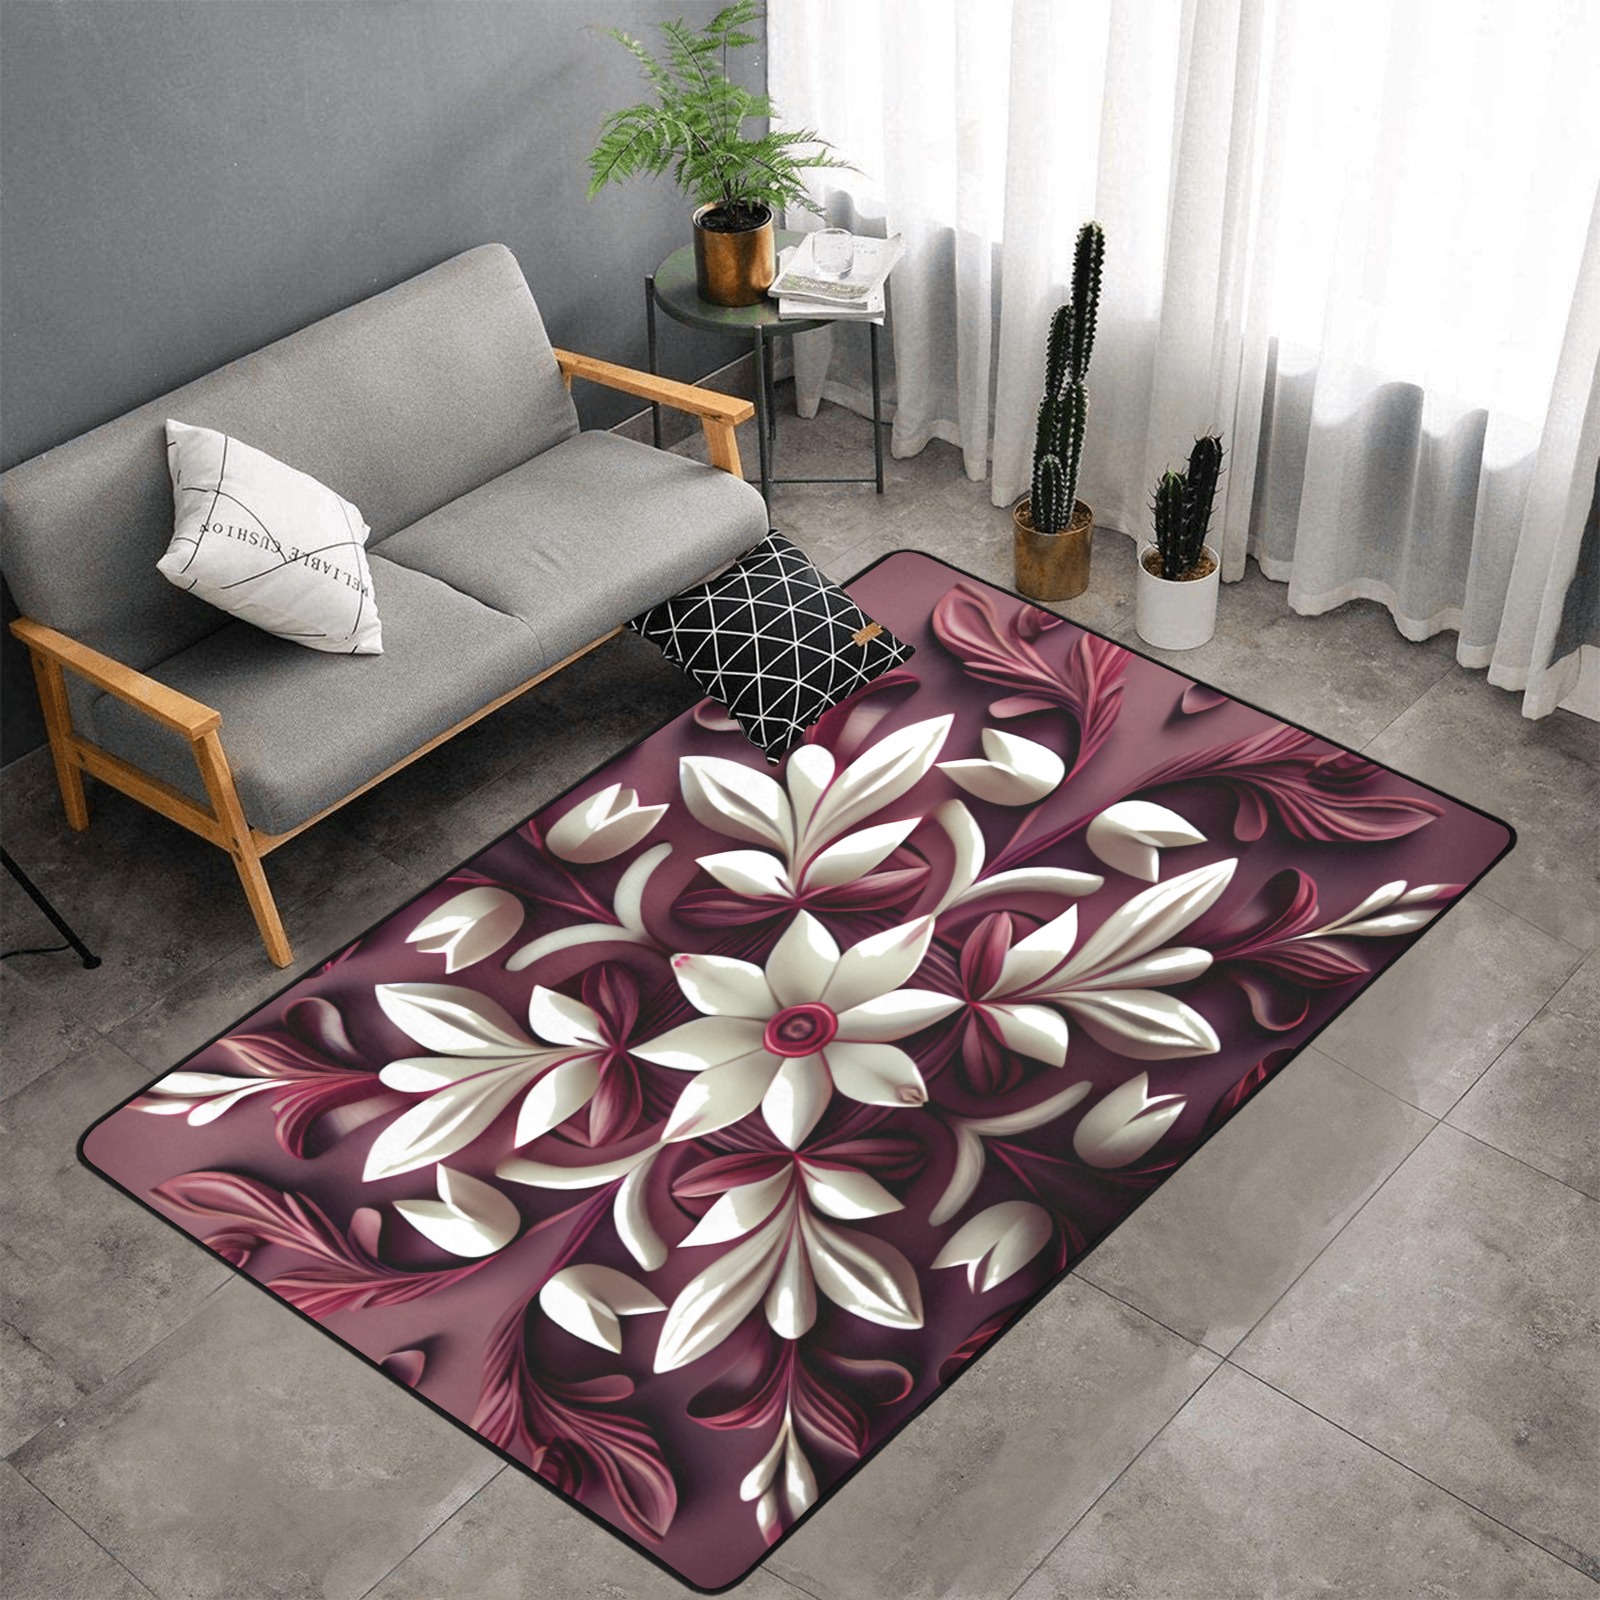 burgundy and white floral pattern Area Rug with Black Binding 7'x5'